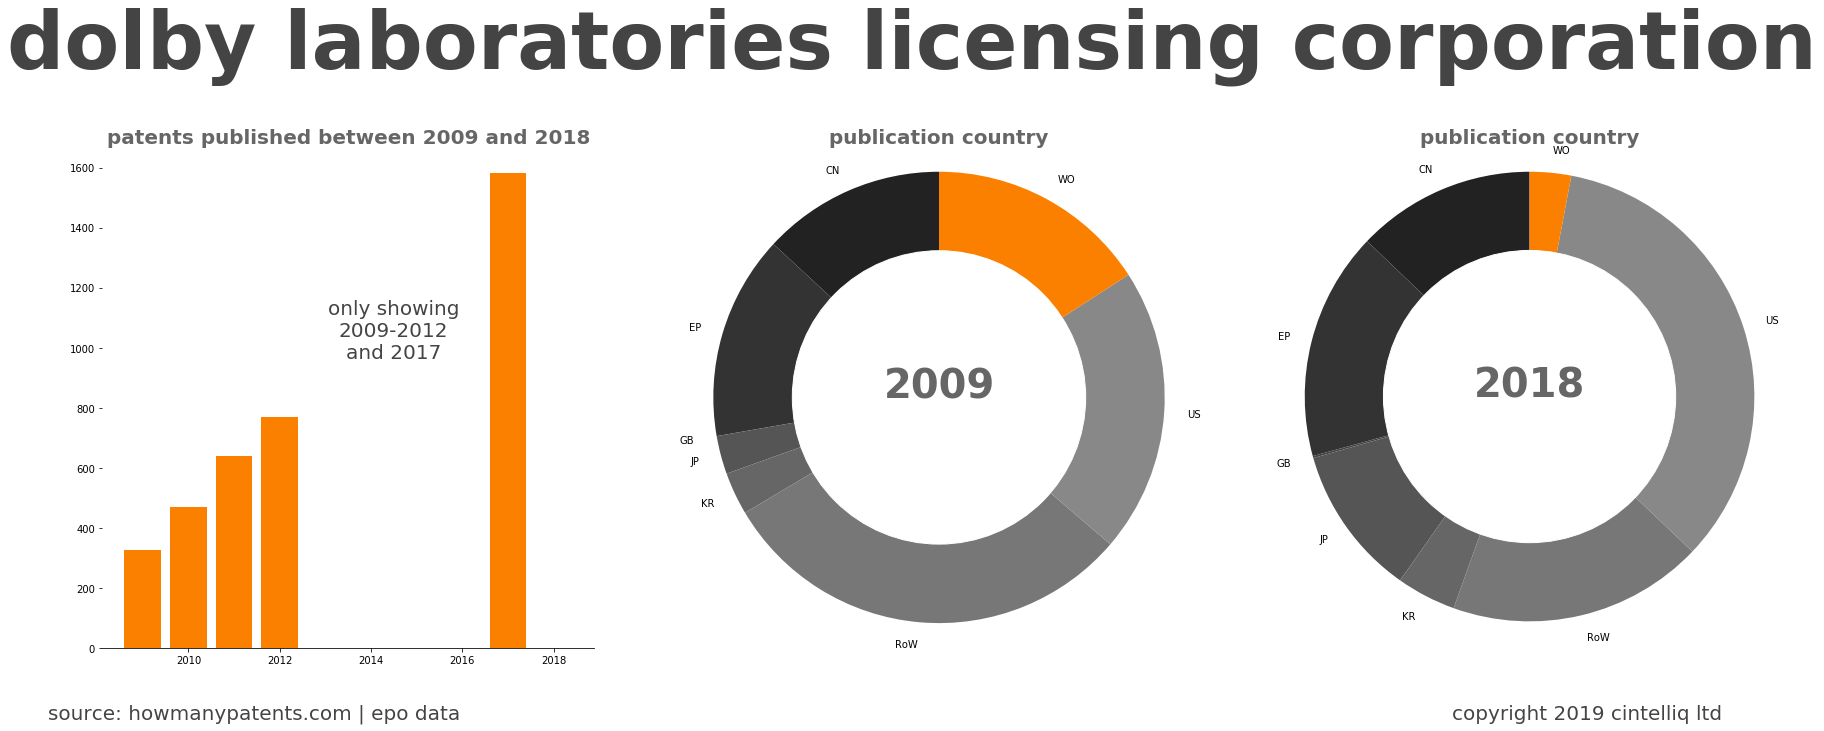 summary of patents for Dolby Laboratories Licensing Corporation